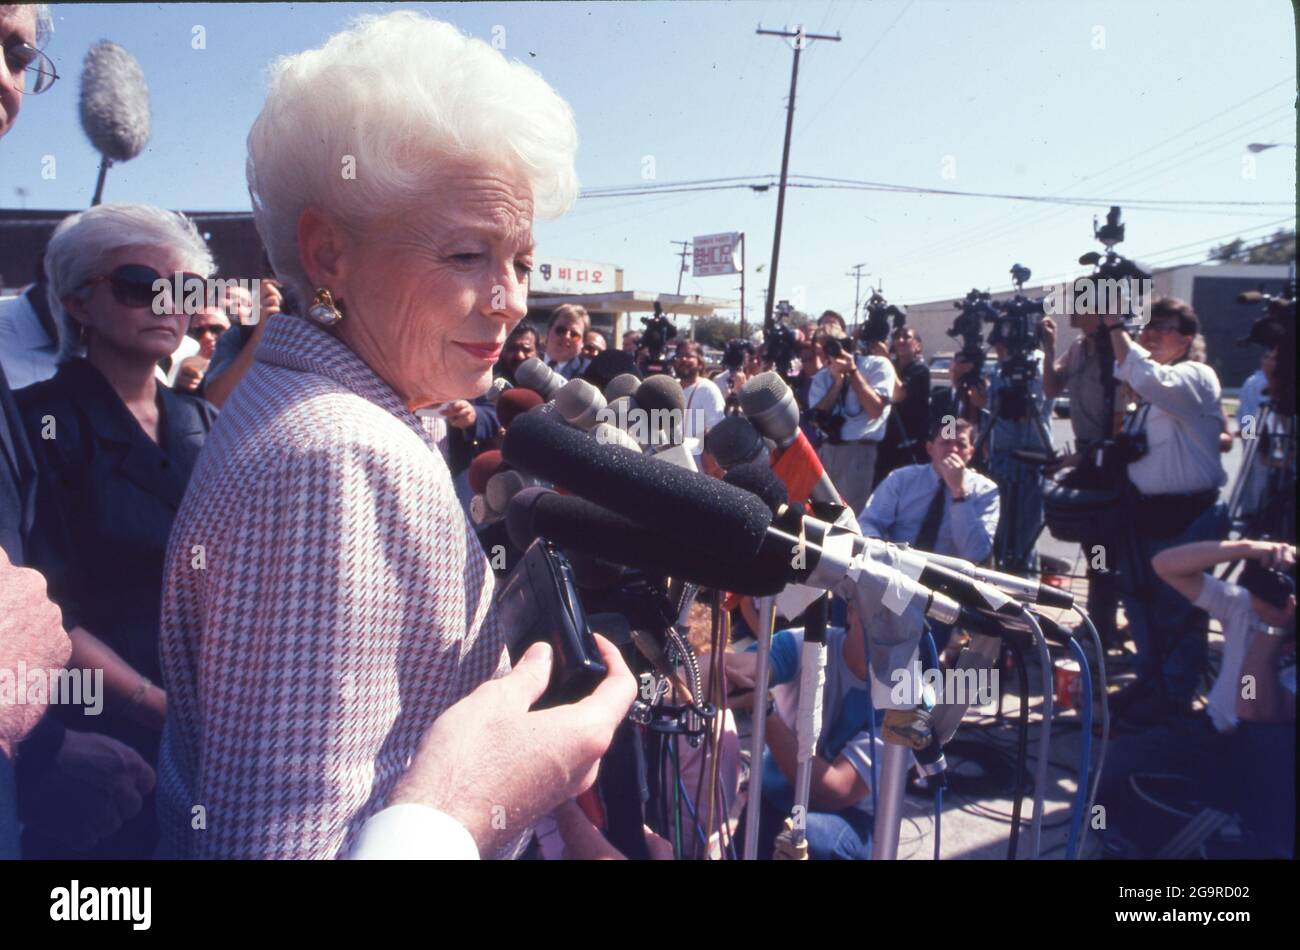 Killeen Texas USA, October 1991: A somber Texas Gov. Ann Richards talks to the press after attending a memorial service for victims of a mass shooting at Luby's Cafeteria in Killeen on October 16. George Hennard, a 35-year-old Killeen resident, crashed a pickup into the eatery and shot 23 people to death before killing himself. ©Bob Daemmrich Stock Photo